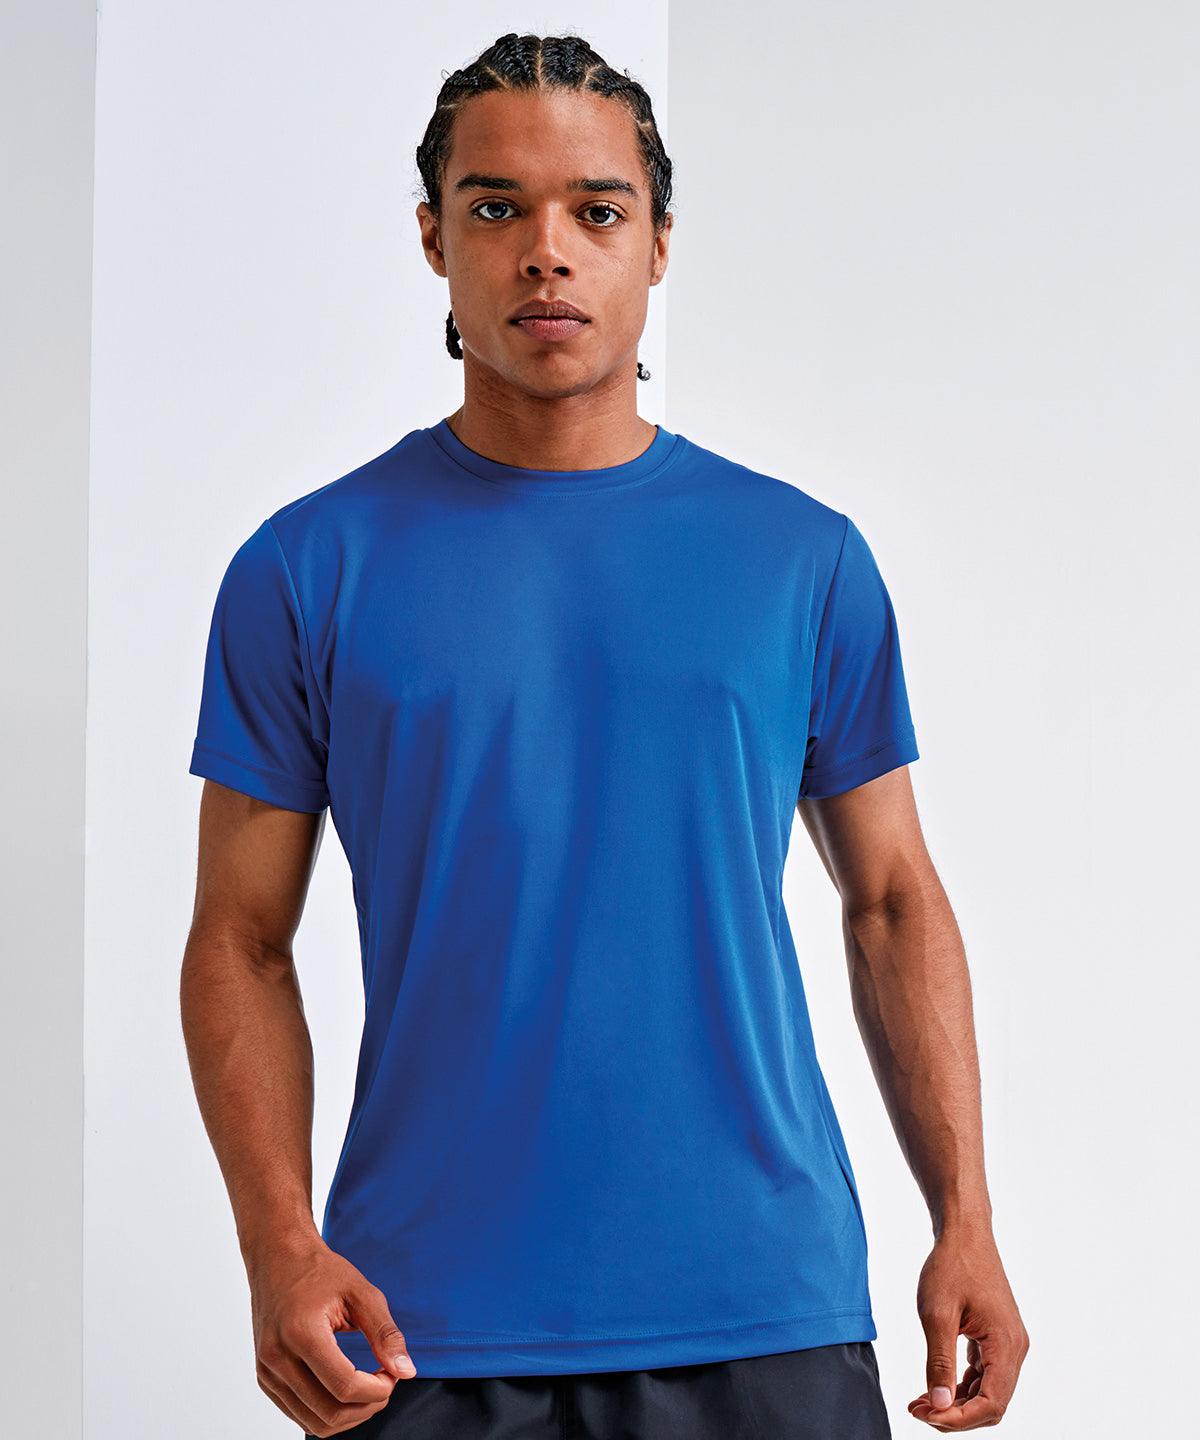 White - TriDri® performance t-shirt T-Shirts TriDri® Activewear & Performance, Athleisurewear, Back to the Gym, Exclusives, Gymwear, Must Haves, New Colours For 2022, Outdoor Sports, Plus Sizes, Rebrandable, Sports & Leisure, T-Shirts & Vests, Team Sportswear, UPF Protection Schoolwear Centres